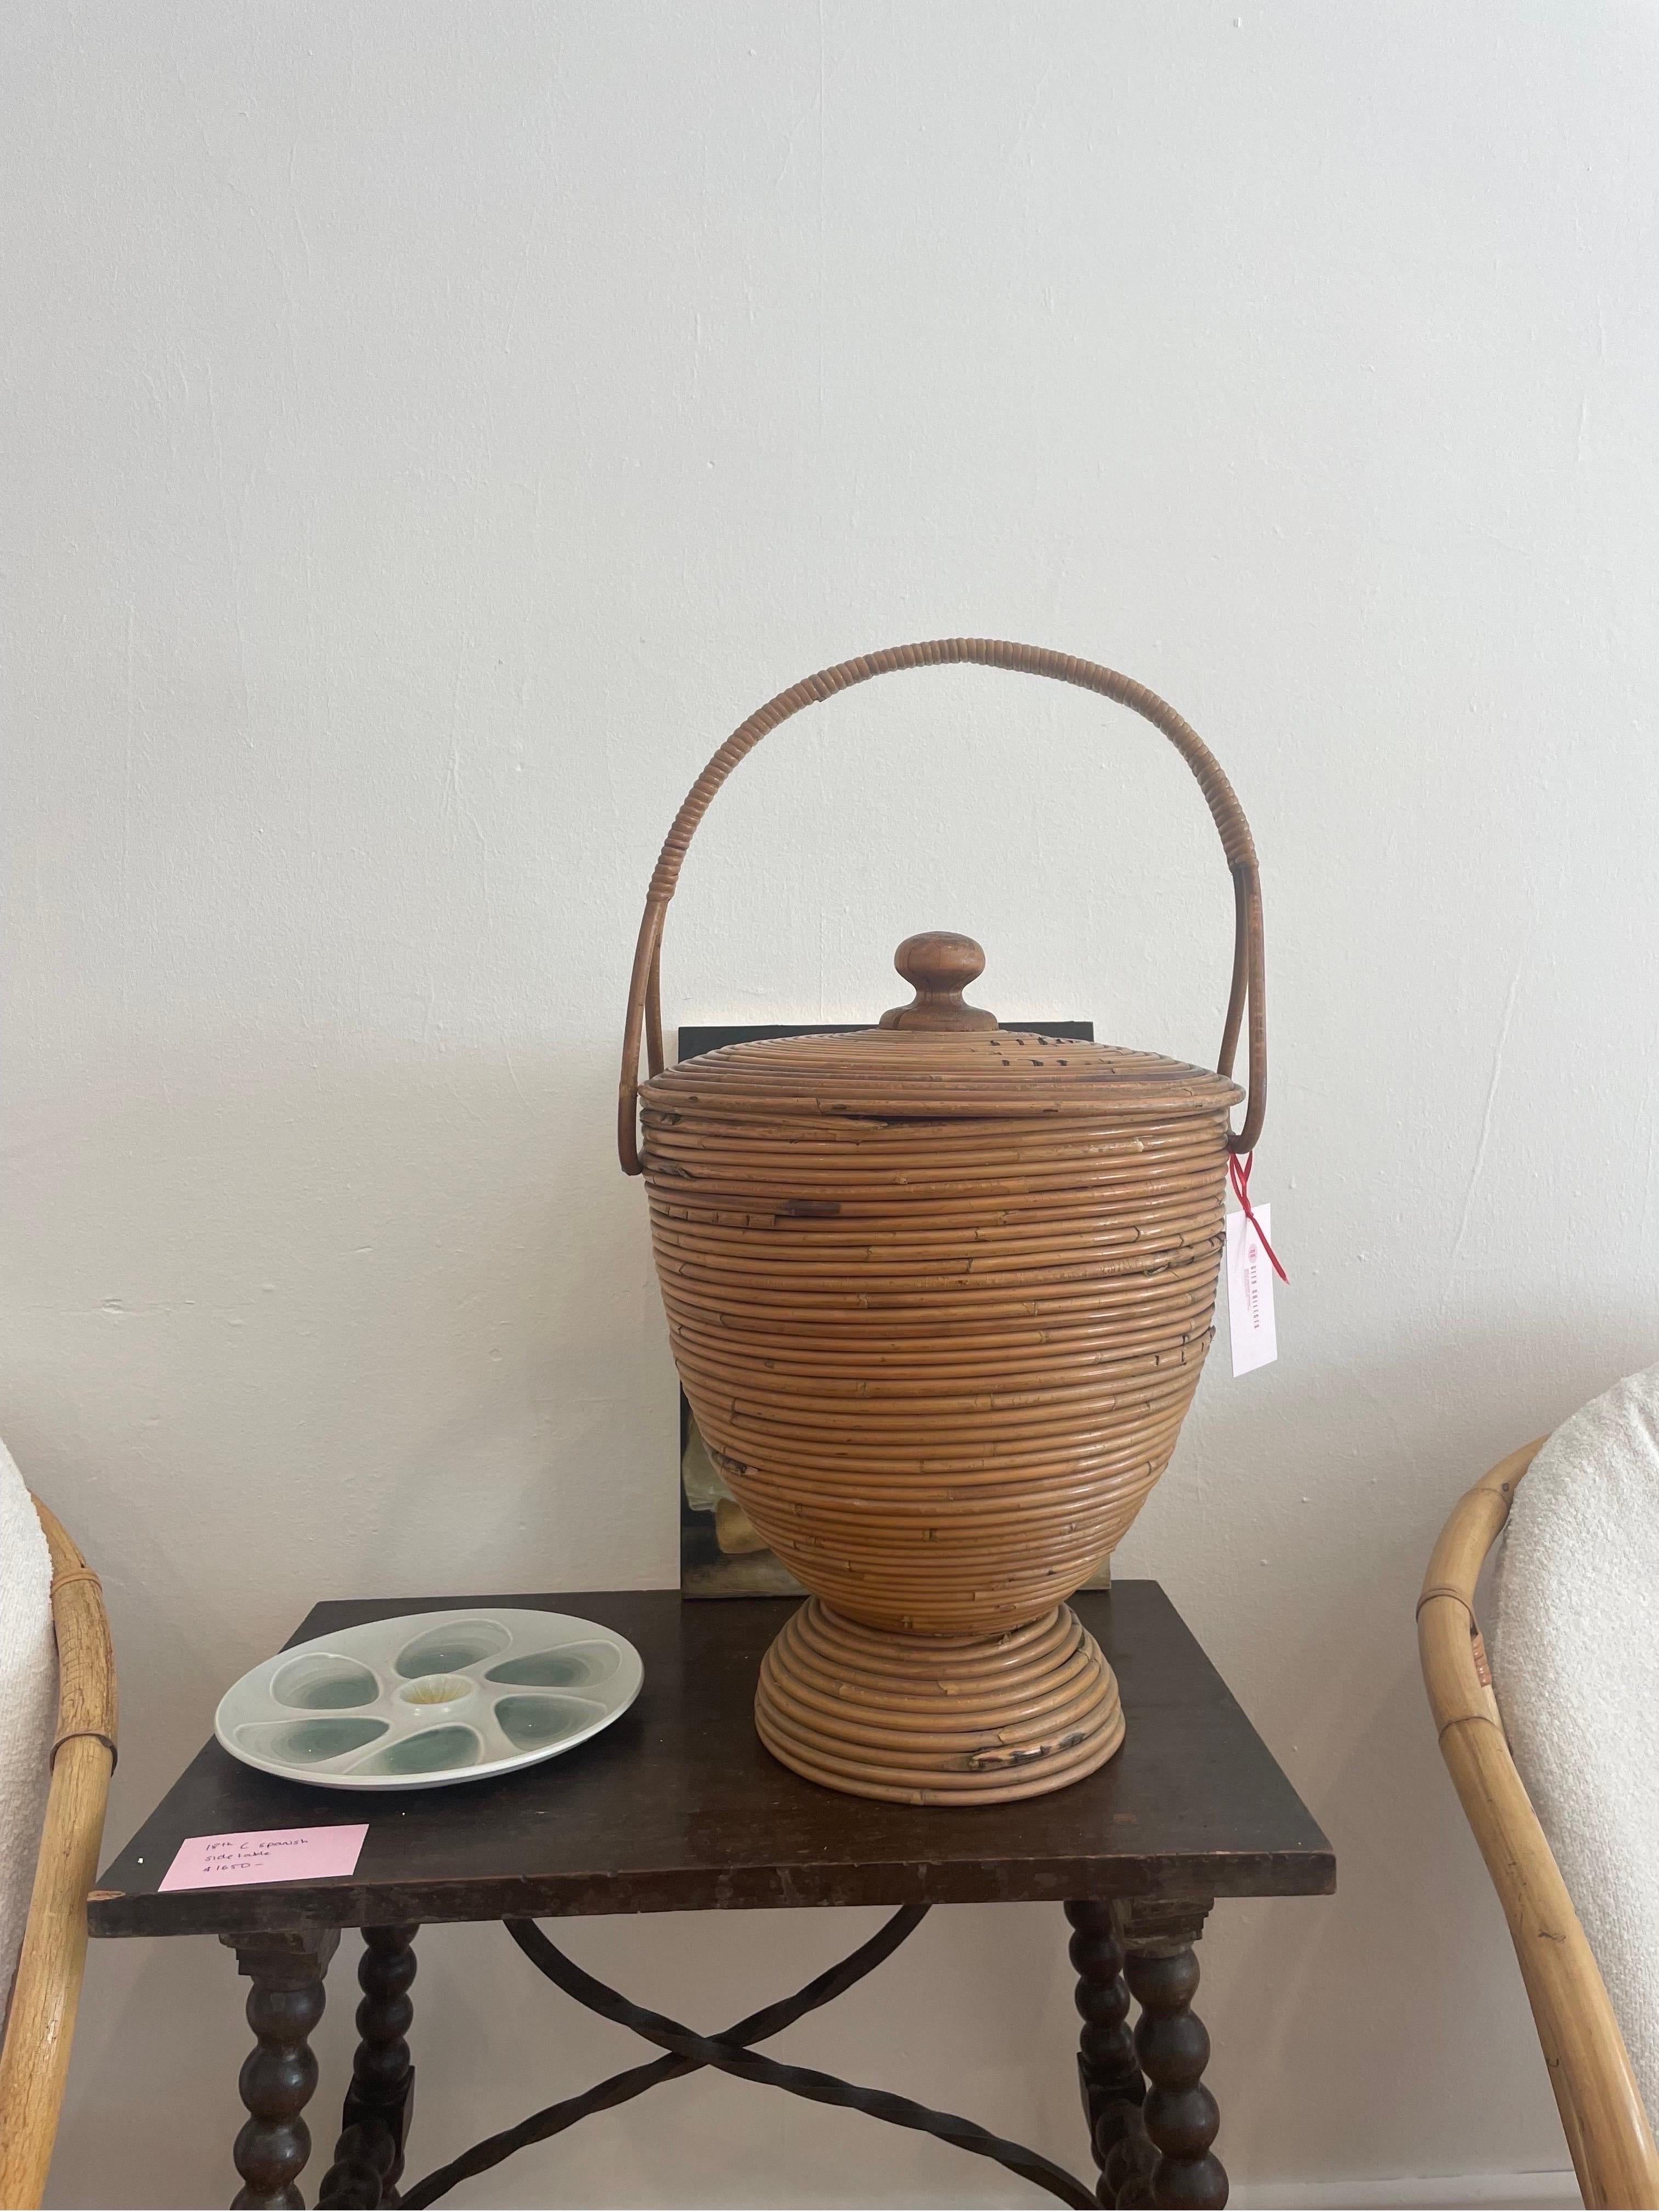 A beautiful Italian mid-century feature basket made of bamboo. In excellent vintage condition. 

44cm height to basket lid, and handle height measures 64cm to top of basket handle. 